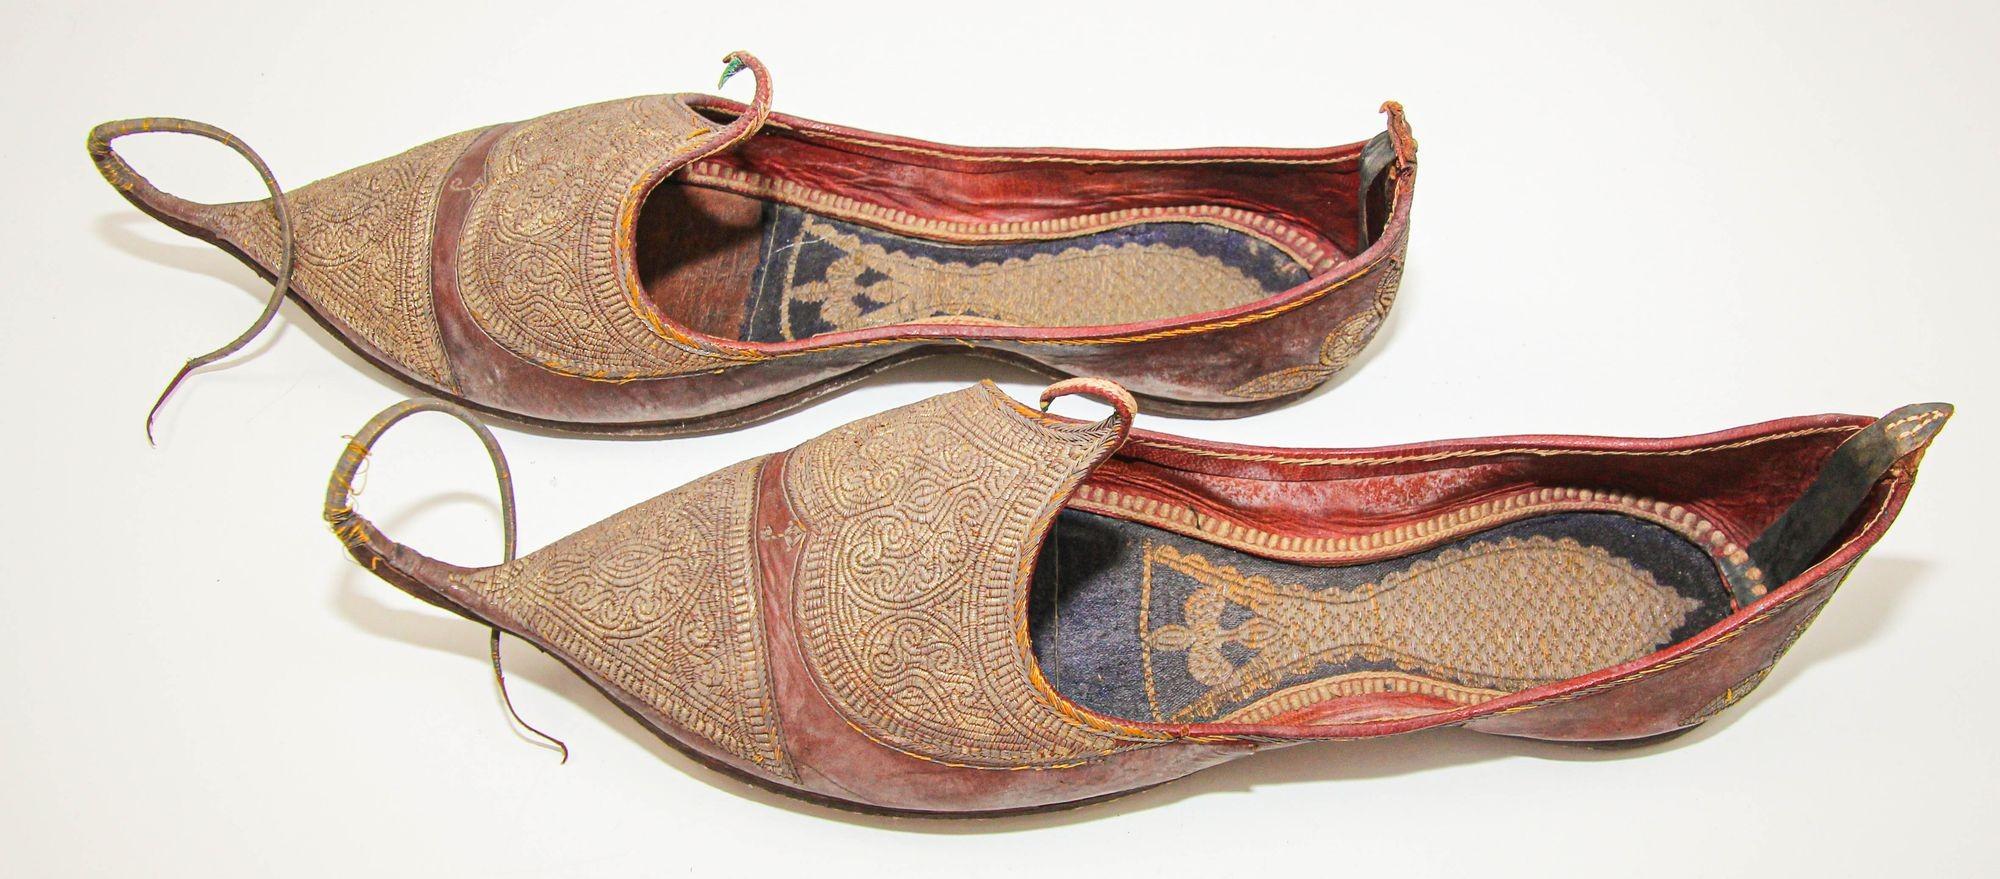 Antique Leather Mughal Raj Ottoman Moorish Shoes Gold Embroidered For Sale 7